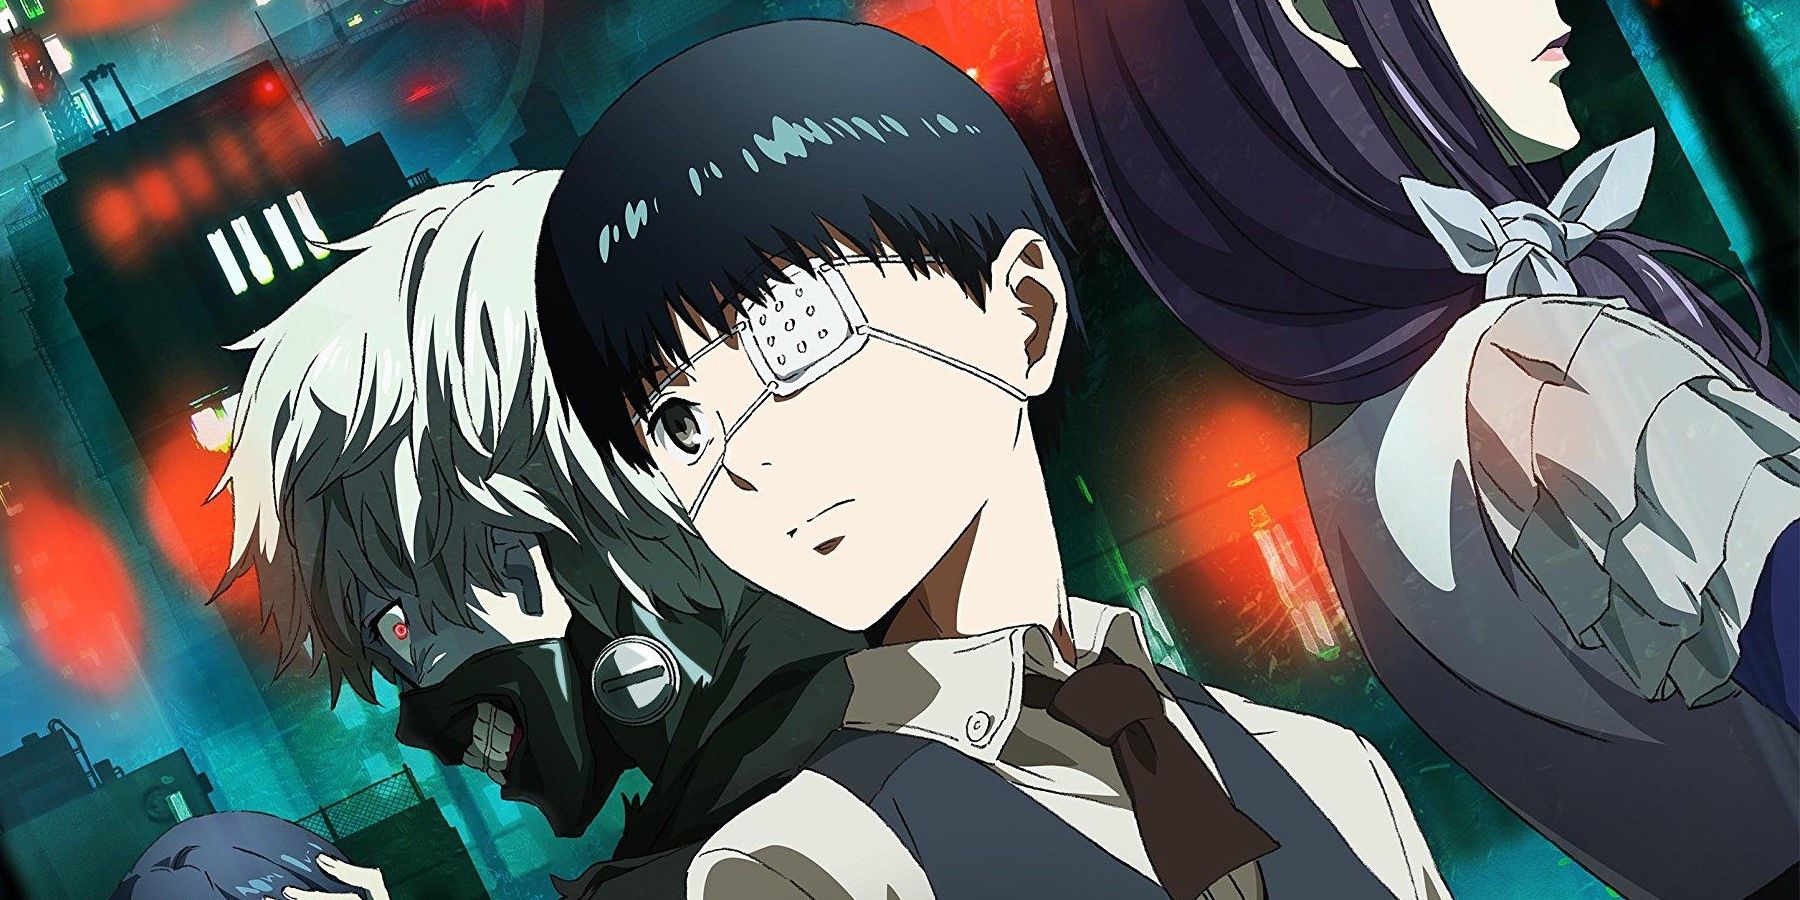 Kaneki back to back with his ghoul persona in the Tokyo Ghoul anime series